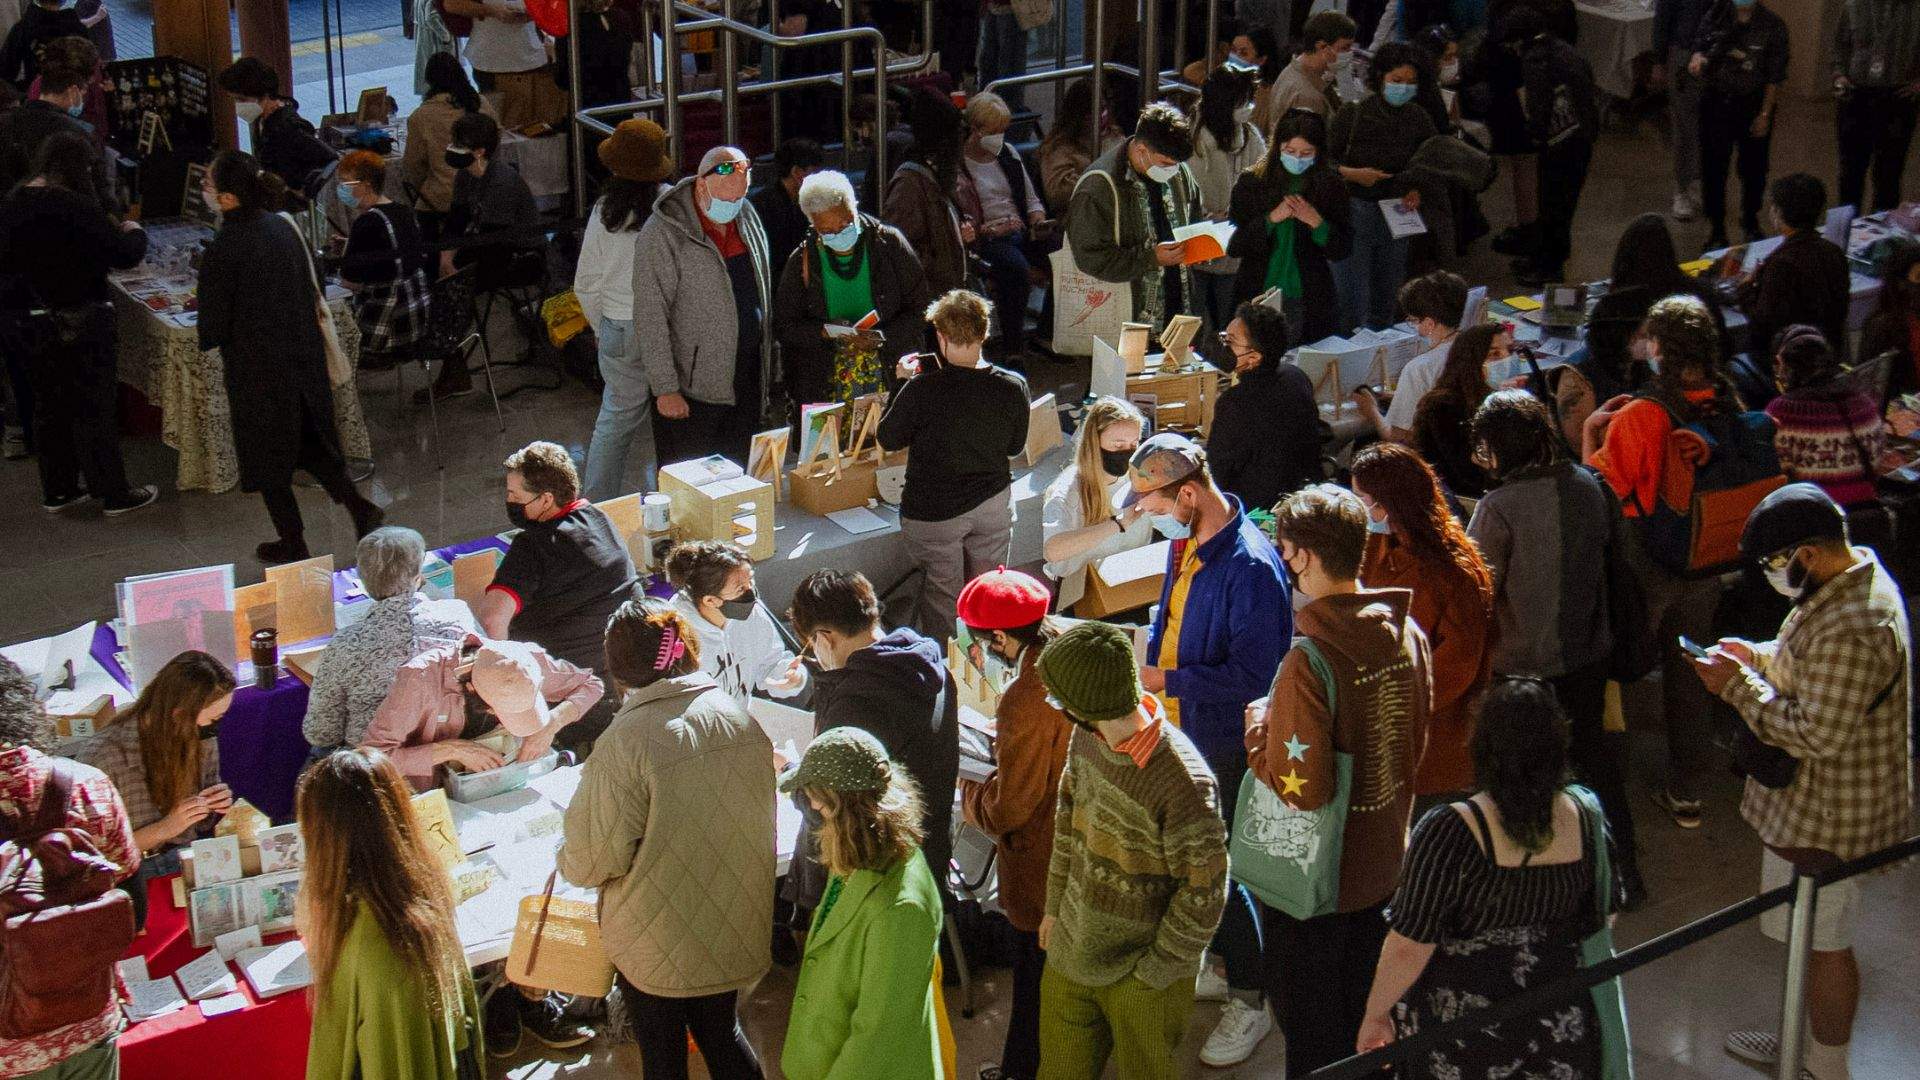 Auckland's Annual Zinefest Market Is Returning for a Huge Weekend This Month